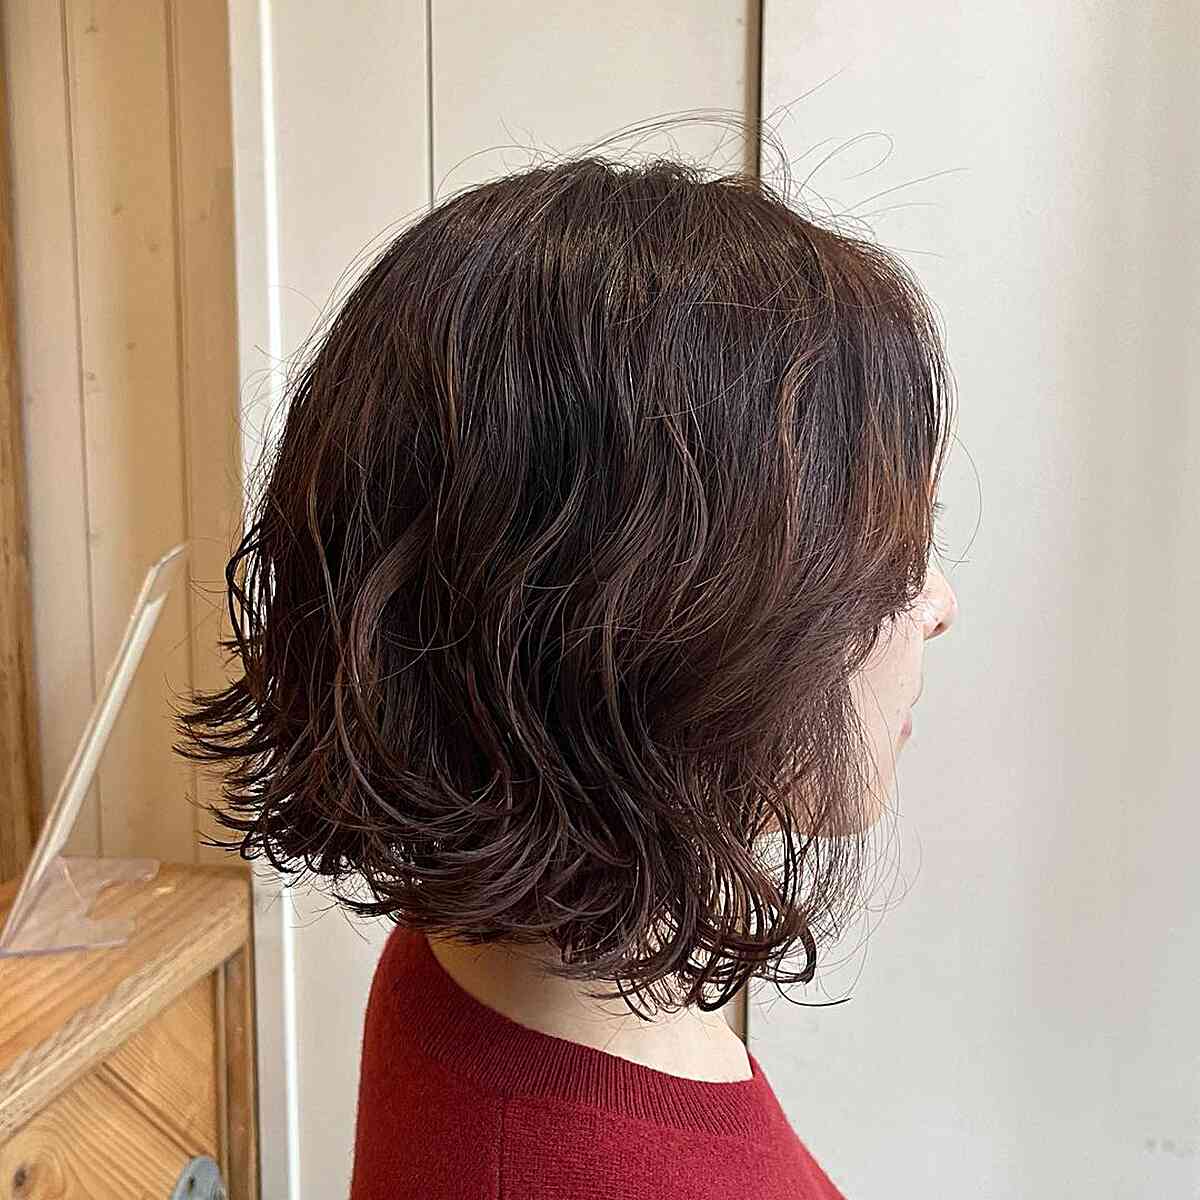 Short-Length Body Permed Loose Waves with Subtle Layers